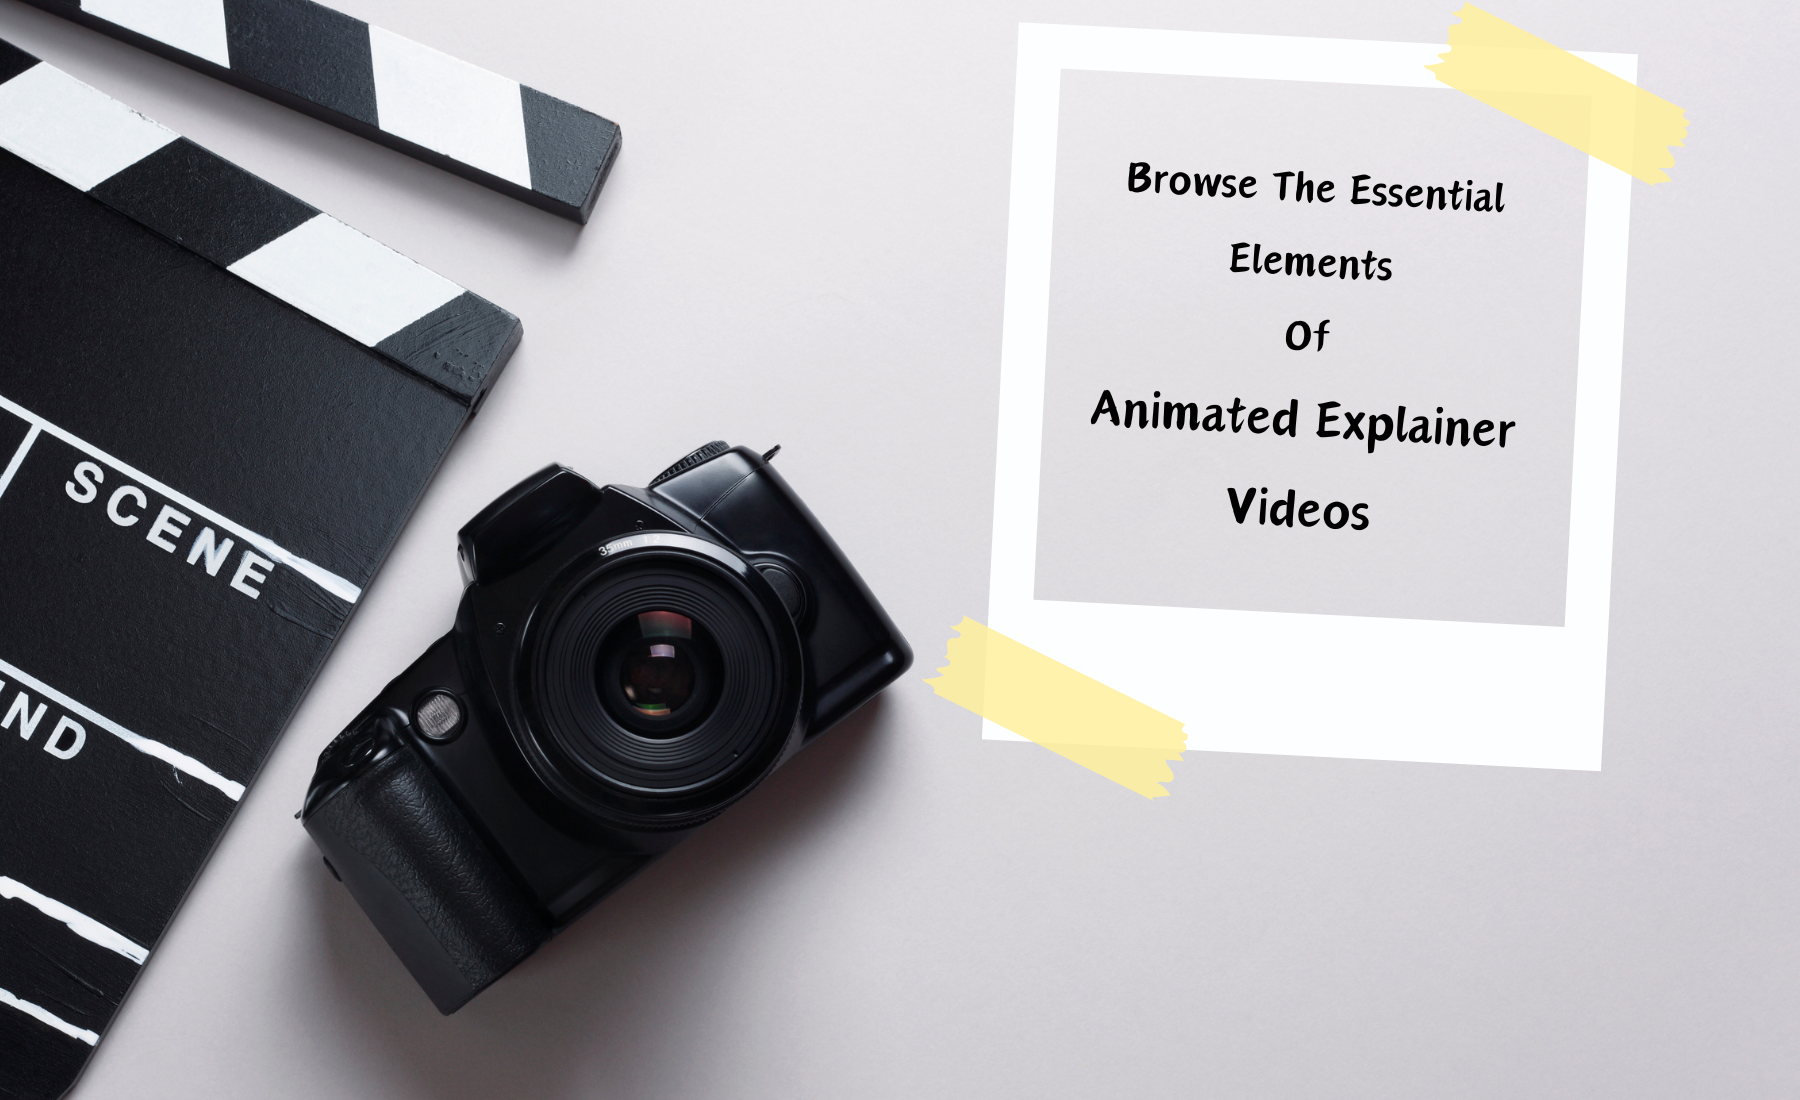 Browse The Essential Elements Of Animated Explainer Videos